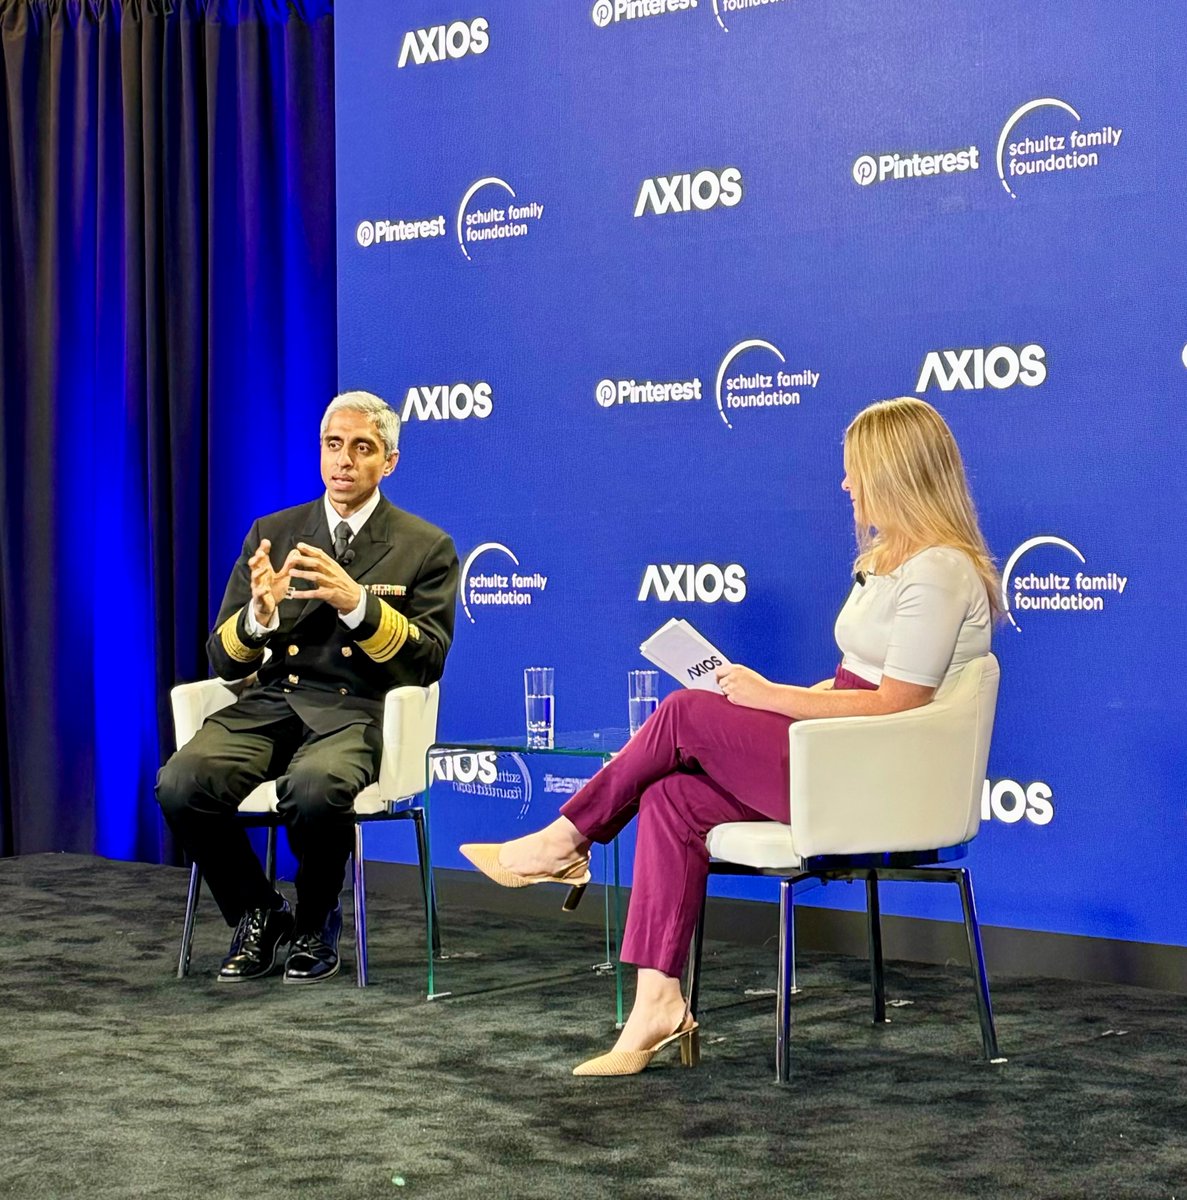 It was great to sit down with @caitlinnowens to discuss the growing youth mental health crisis and applaud the launch of @AmeriCorps’ Youth Mental Health Corps. Grateful for initiatives like this and the people who bring them to life. @axios